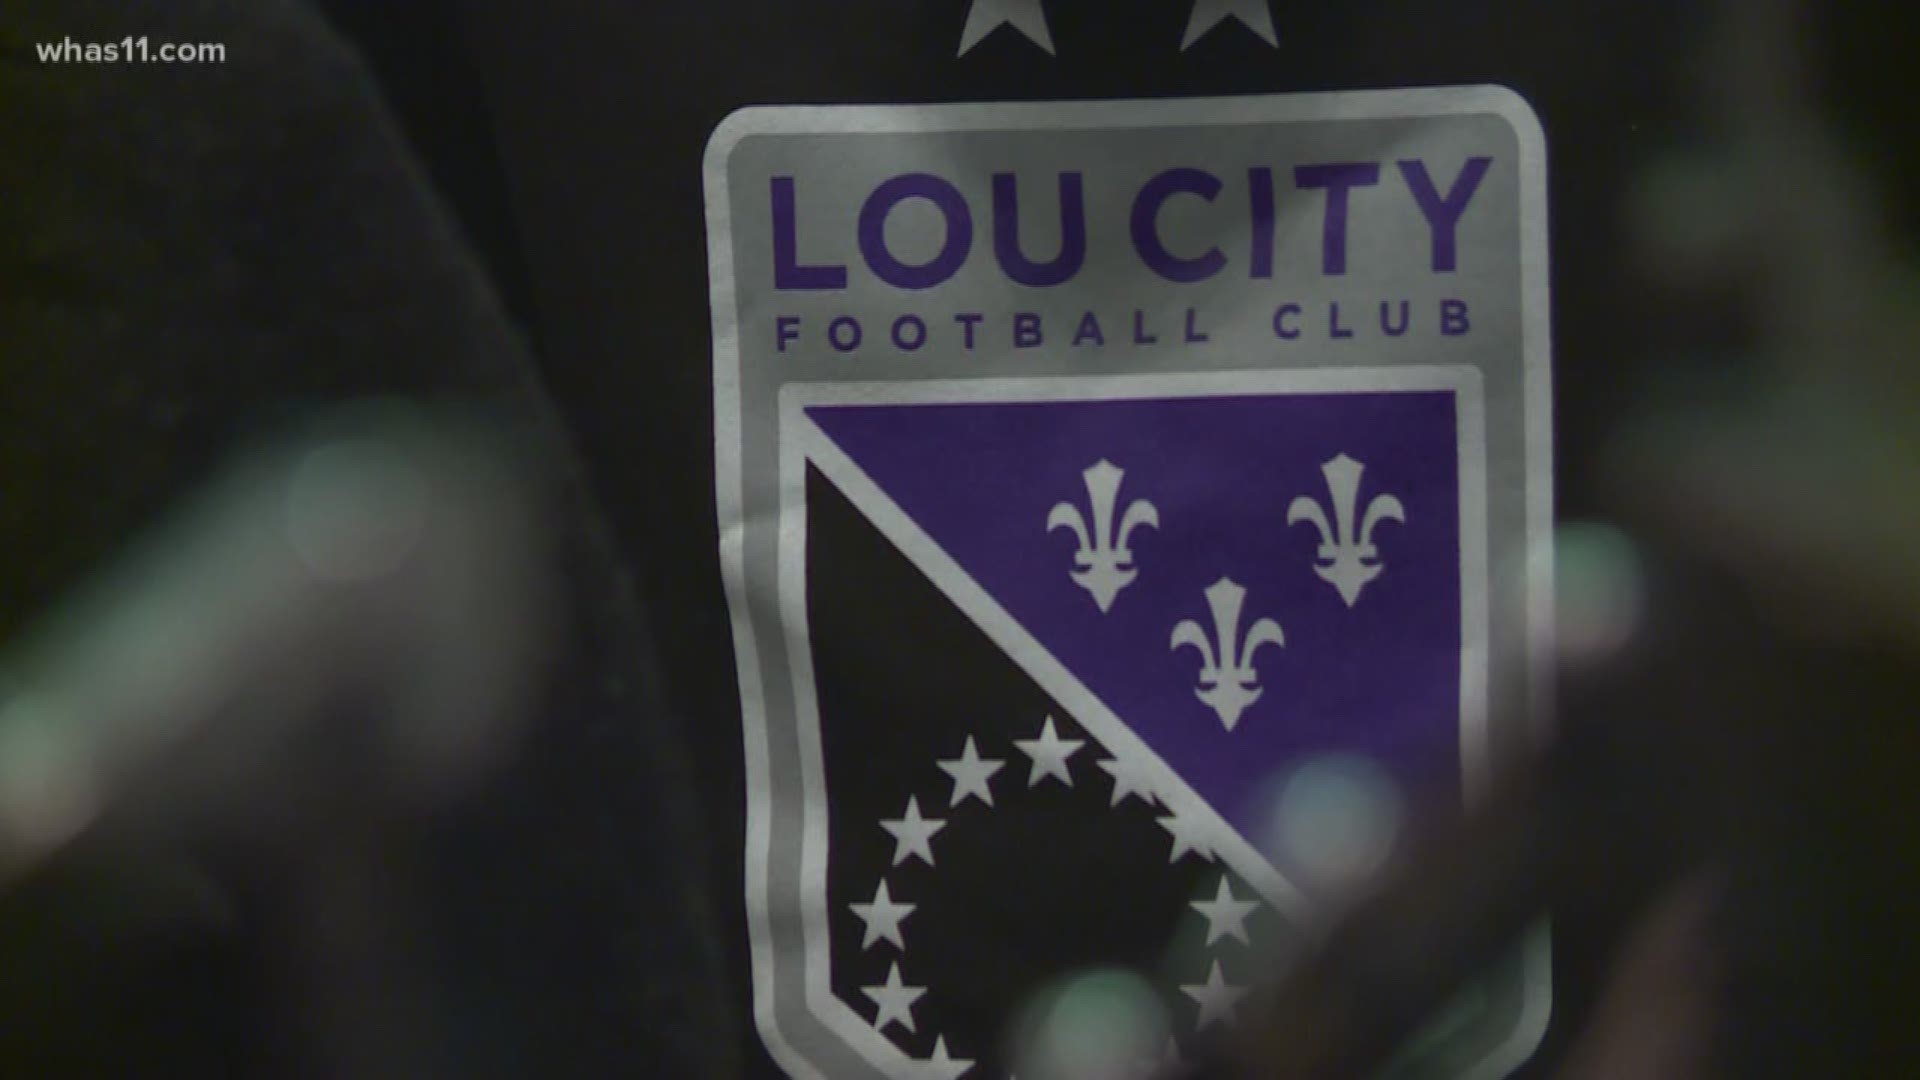 "We focused our efforts on paying homage to the city we love while working to make a new mark that is bold and clean," said LouCity President Brad Estes.